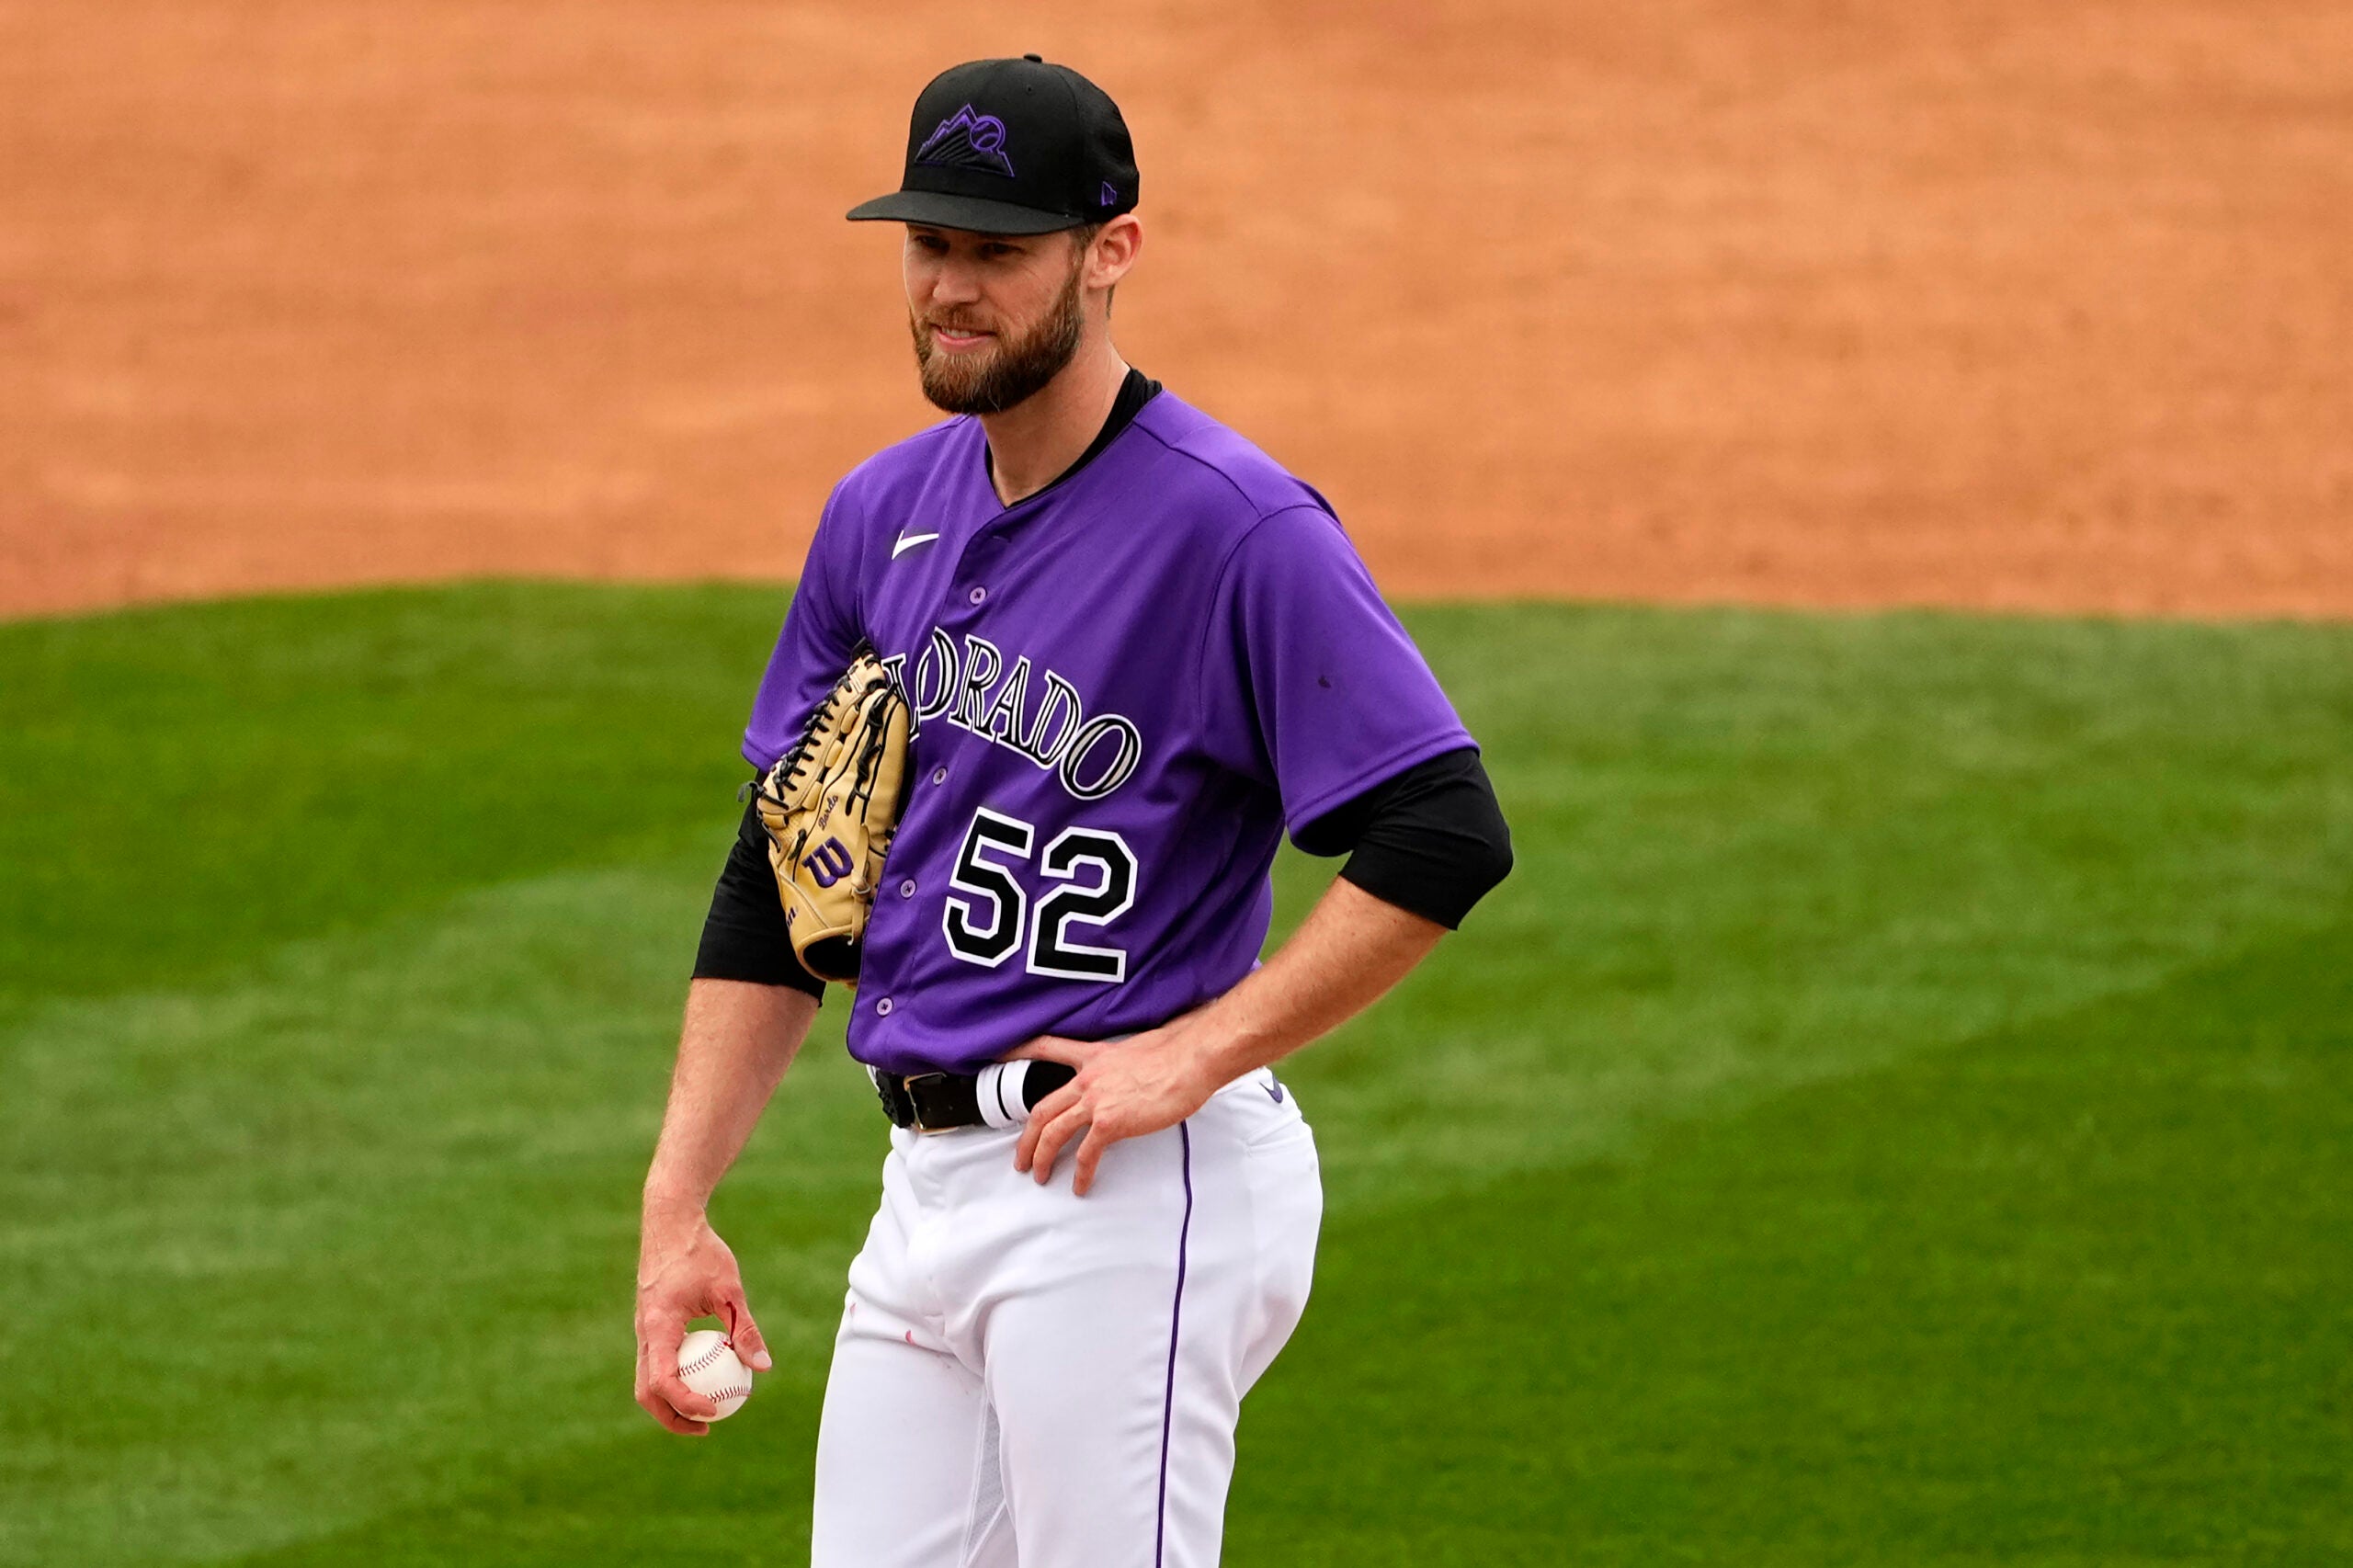 Colorado Rockies relief pitcher Daniel Bard is pulled from the game with a bloodied hand.